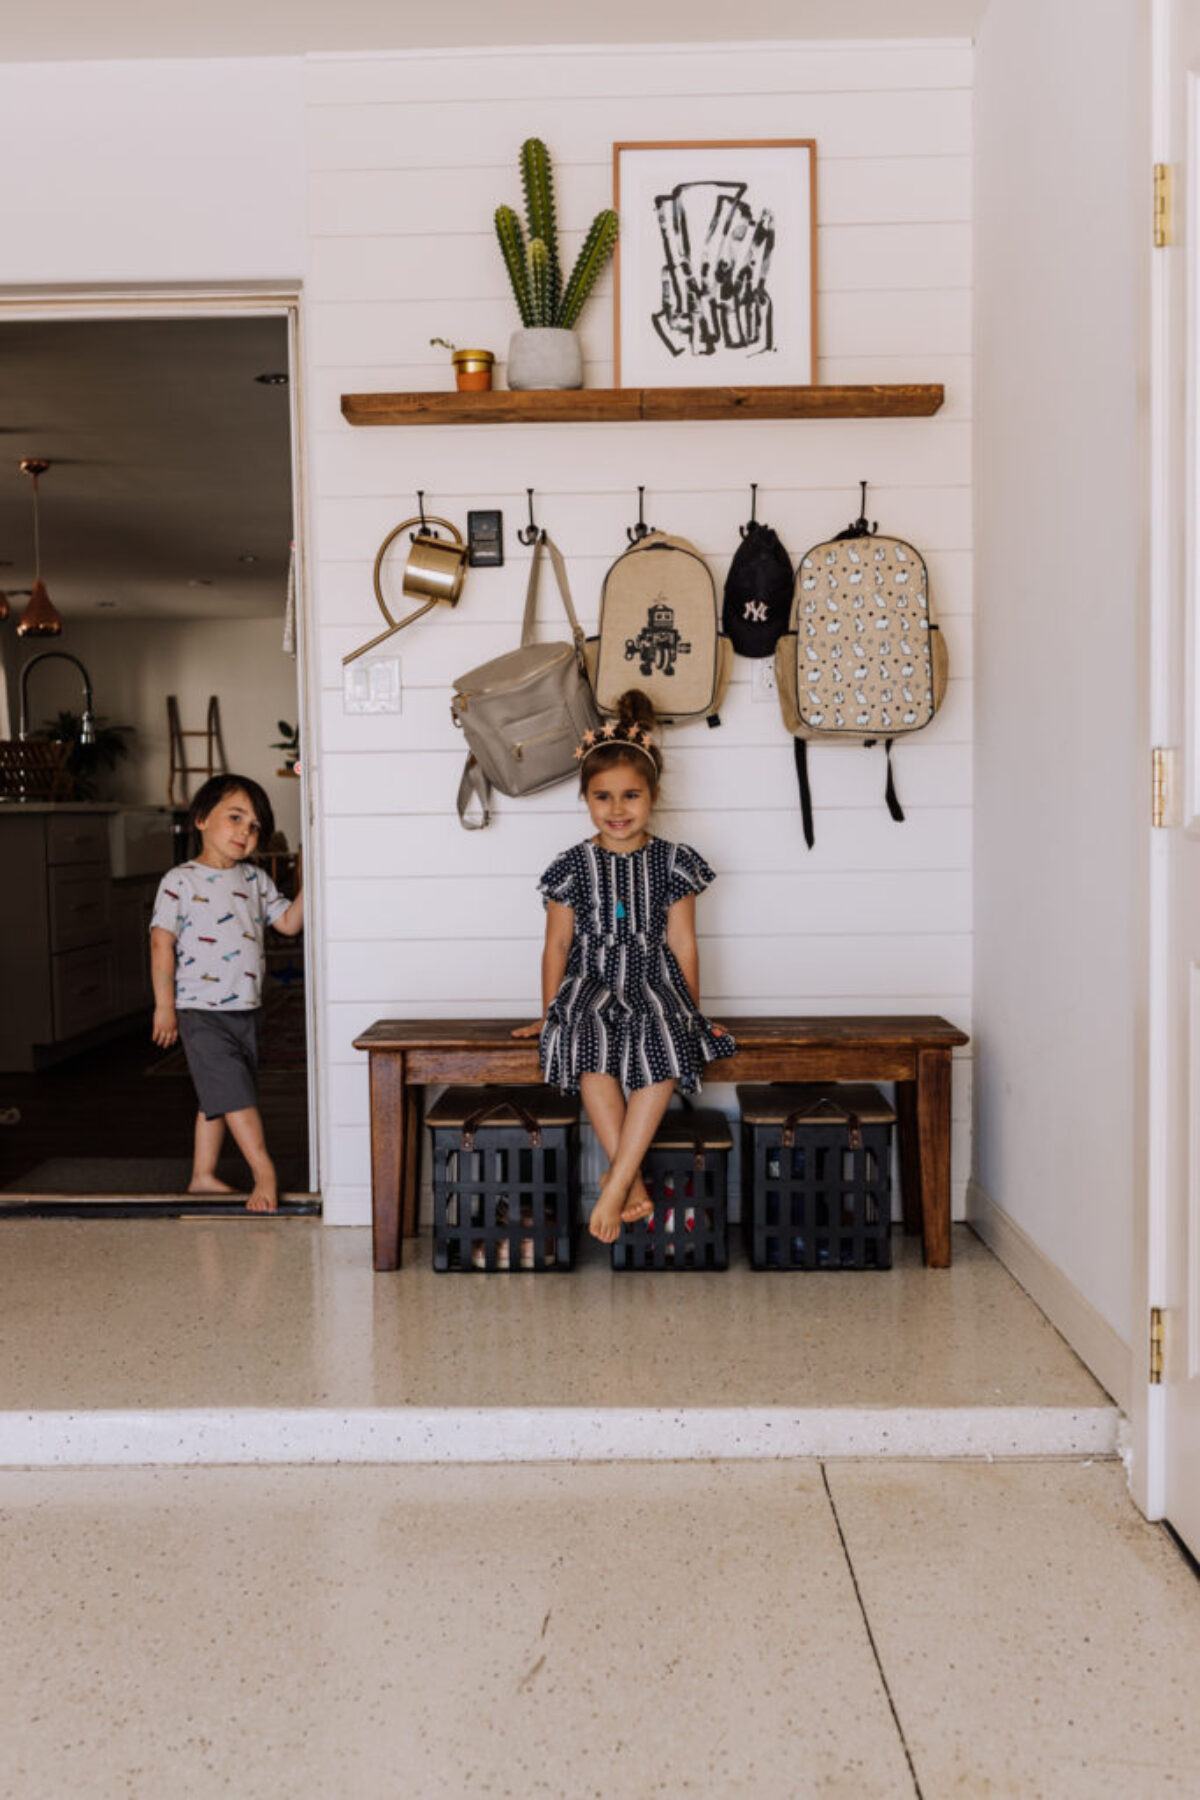 coming home from school, the kids hang their backpacks in the garage | thelovedesignedlife.com #thedailymoments #home #garageorganization #interiordesign